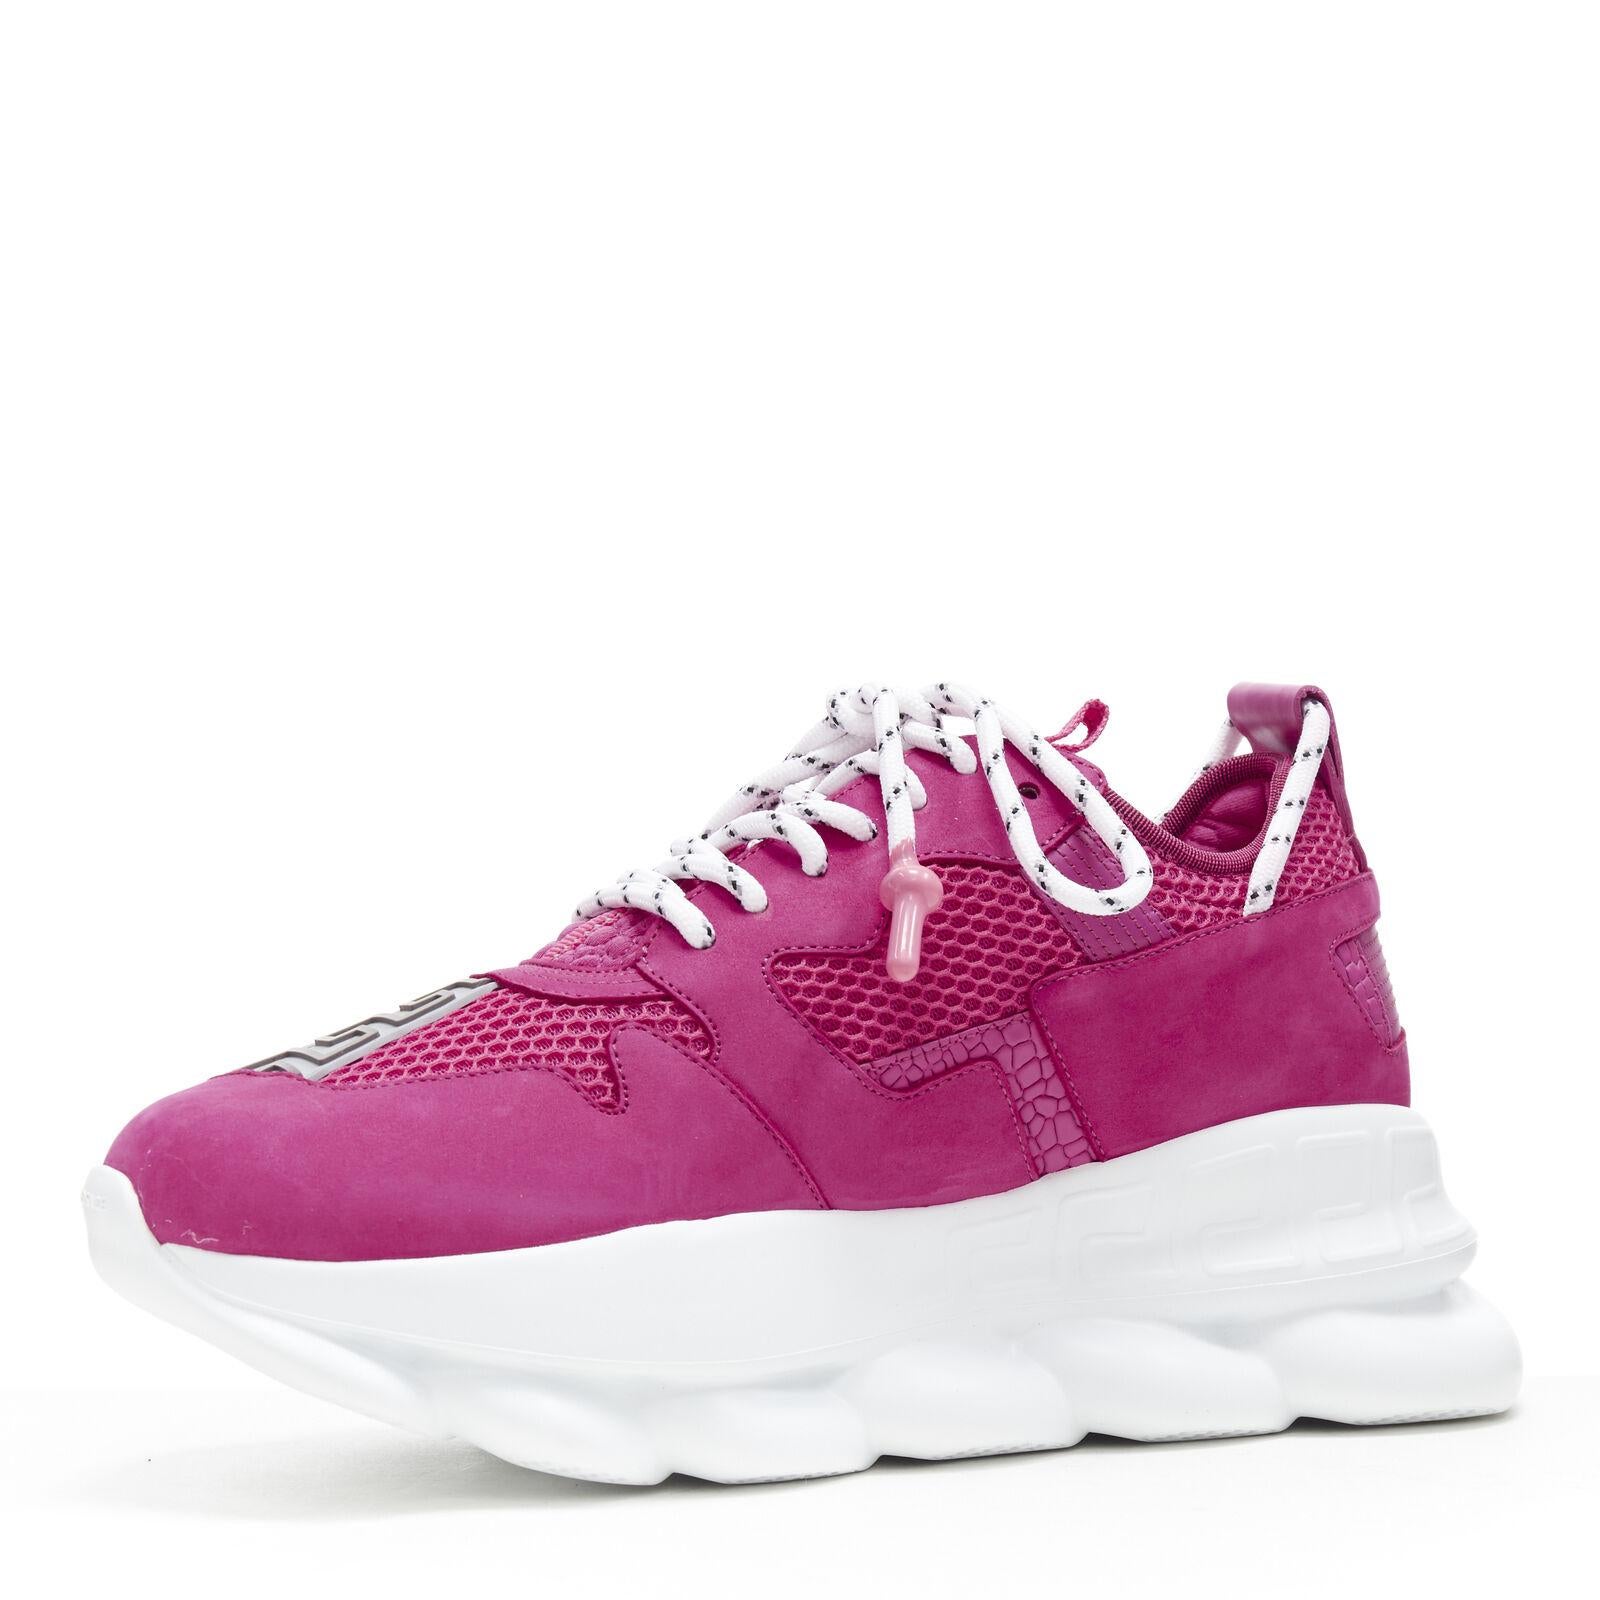 Men's new VERSACE Chain Reaction Blowzy all pink suede low top chunky sneaker EU42.5 For Sale